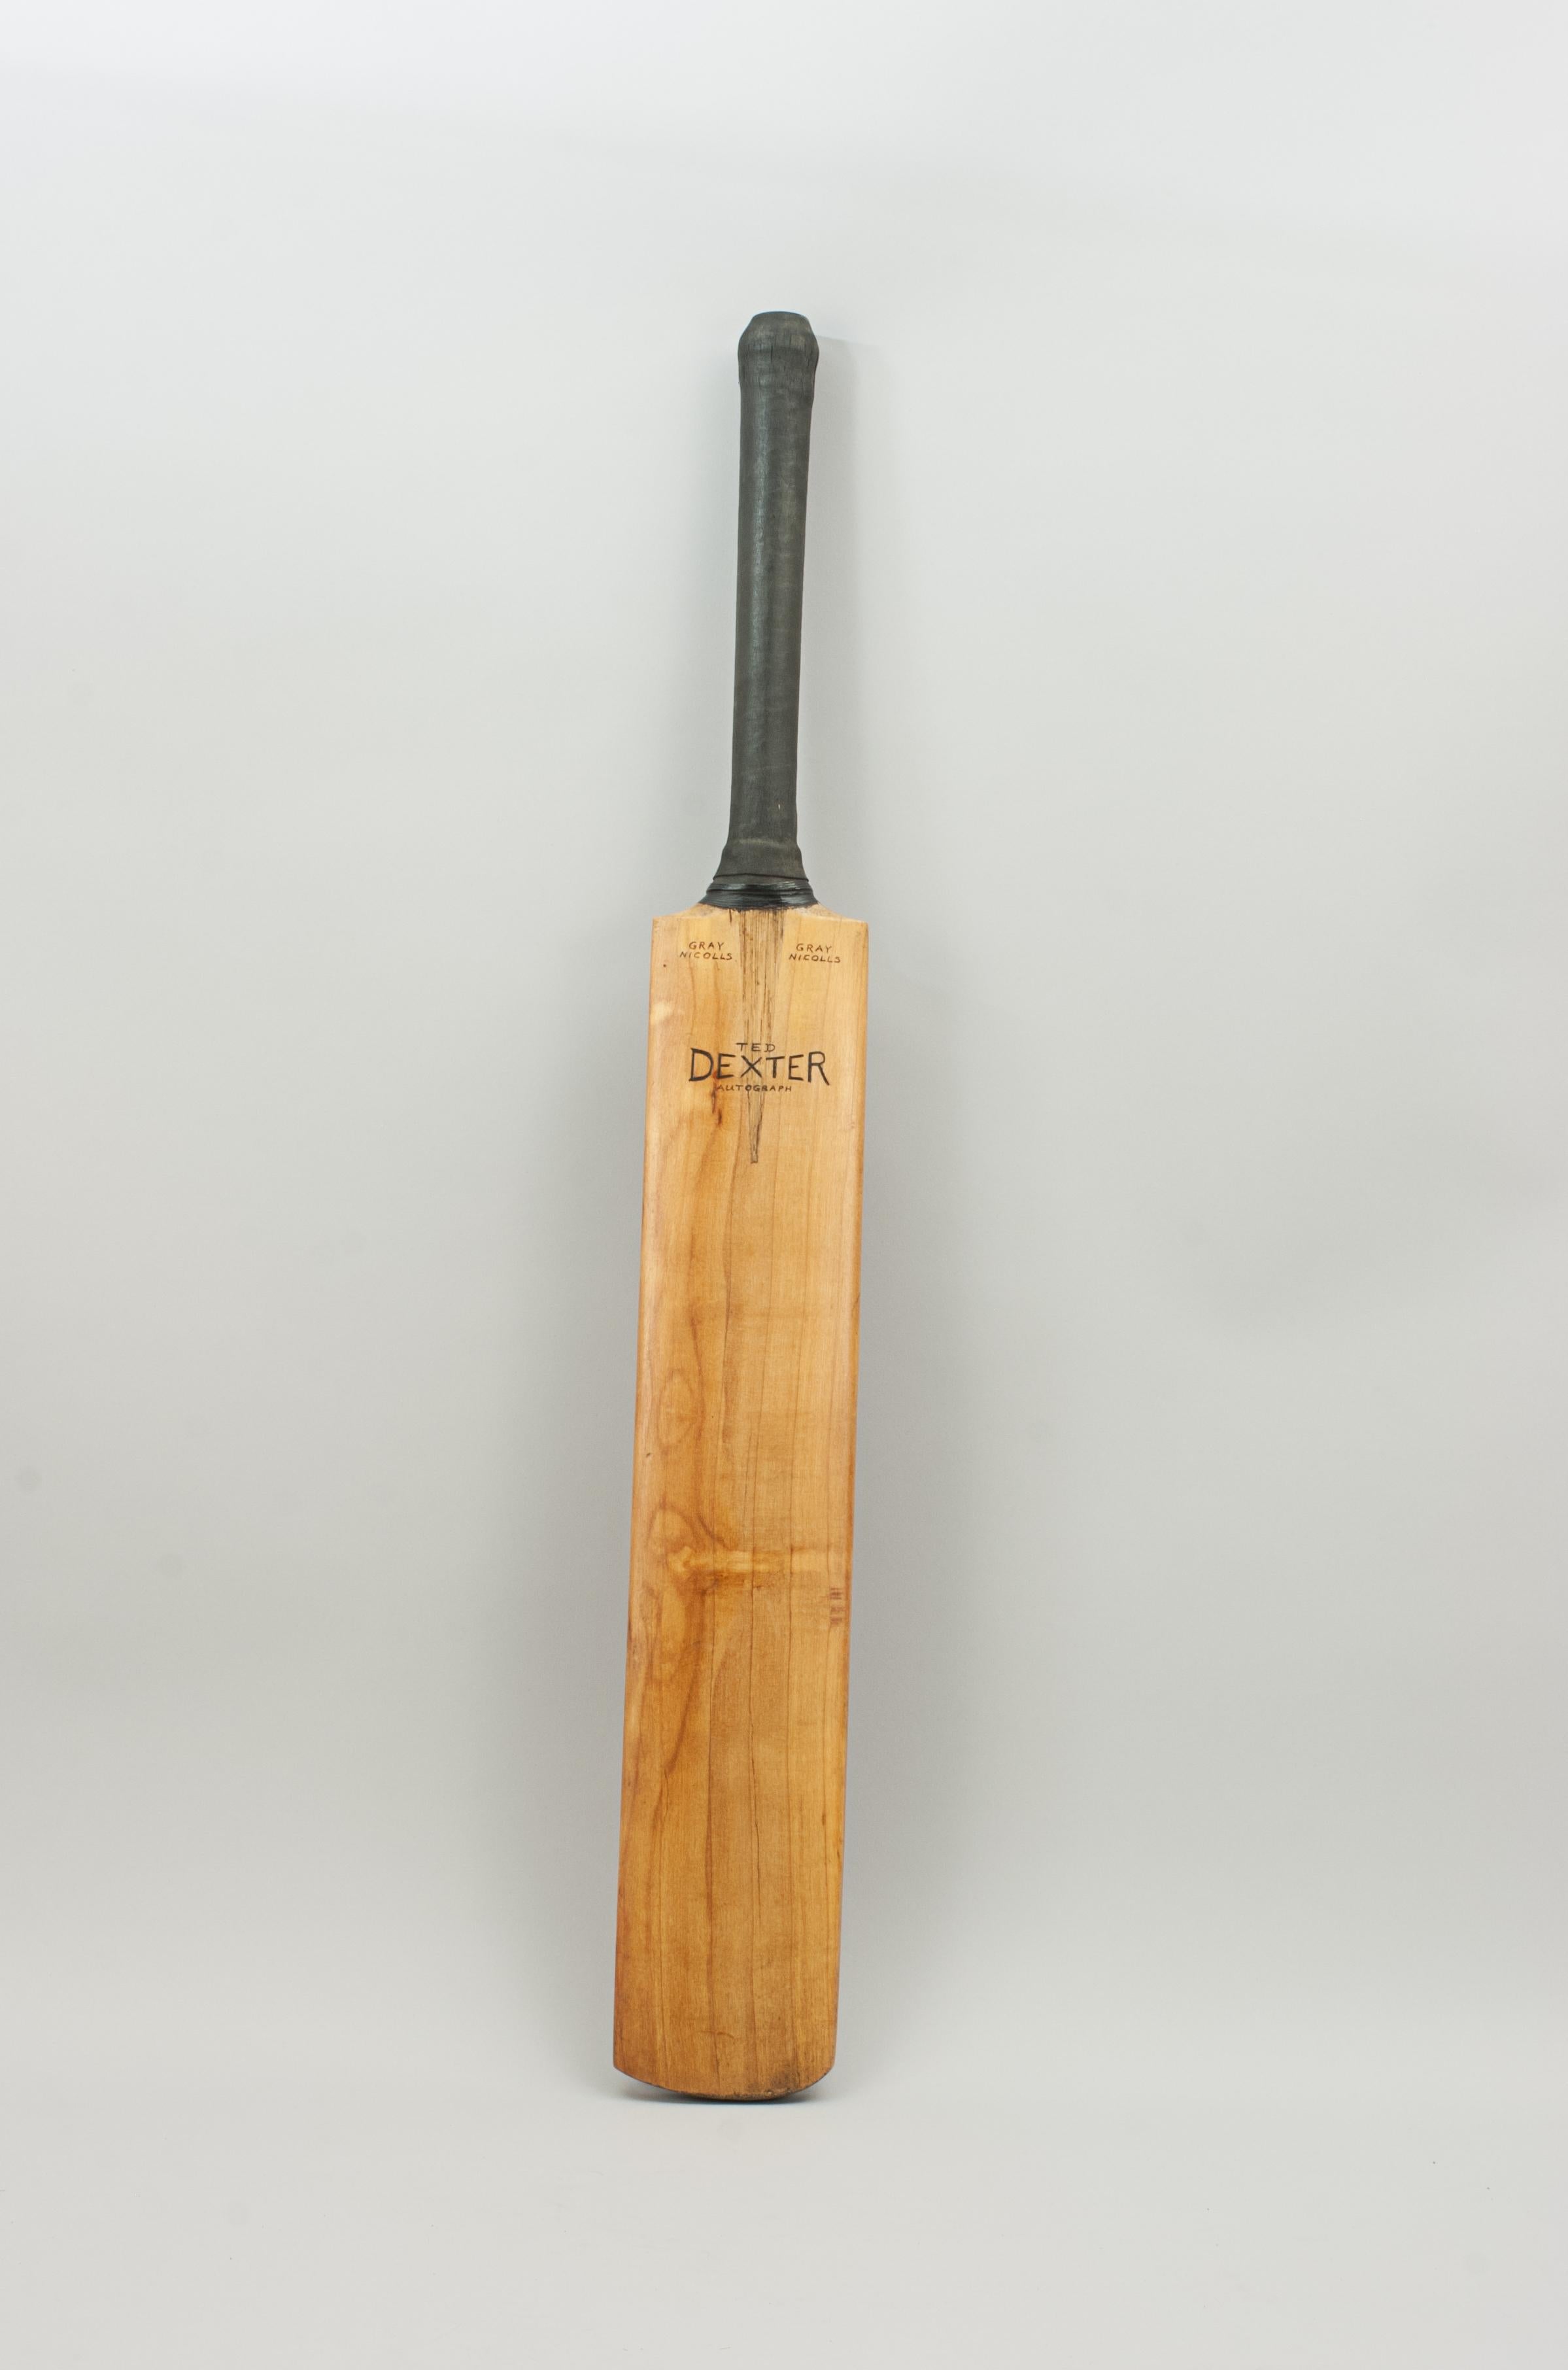 Mid-20th Century Ted Dexter Cricket Bat by Gray Nicolls For Sale